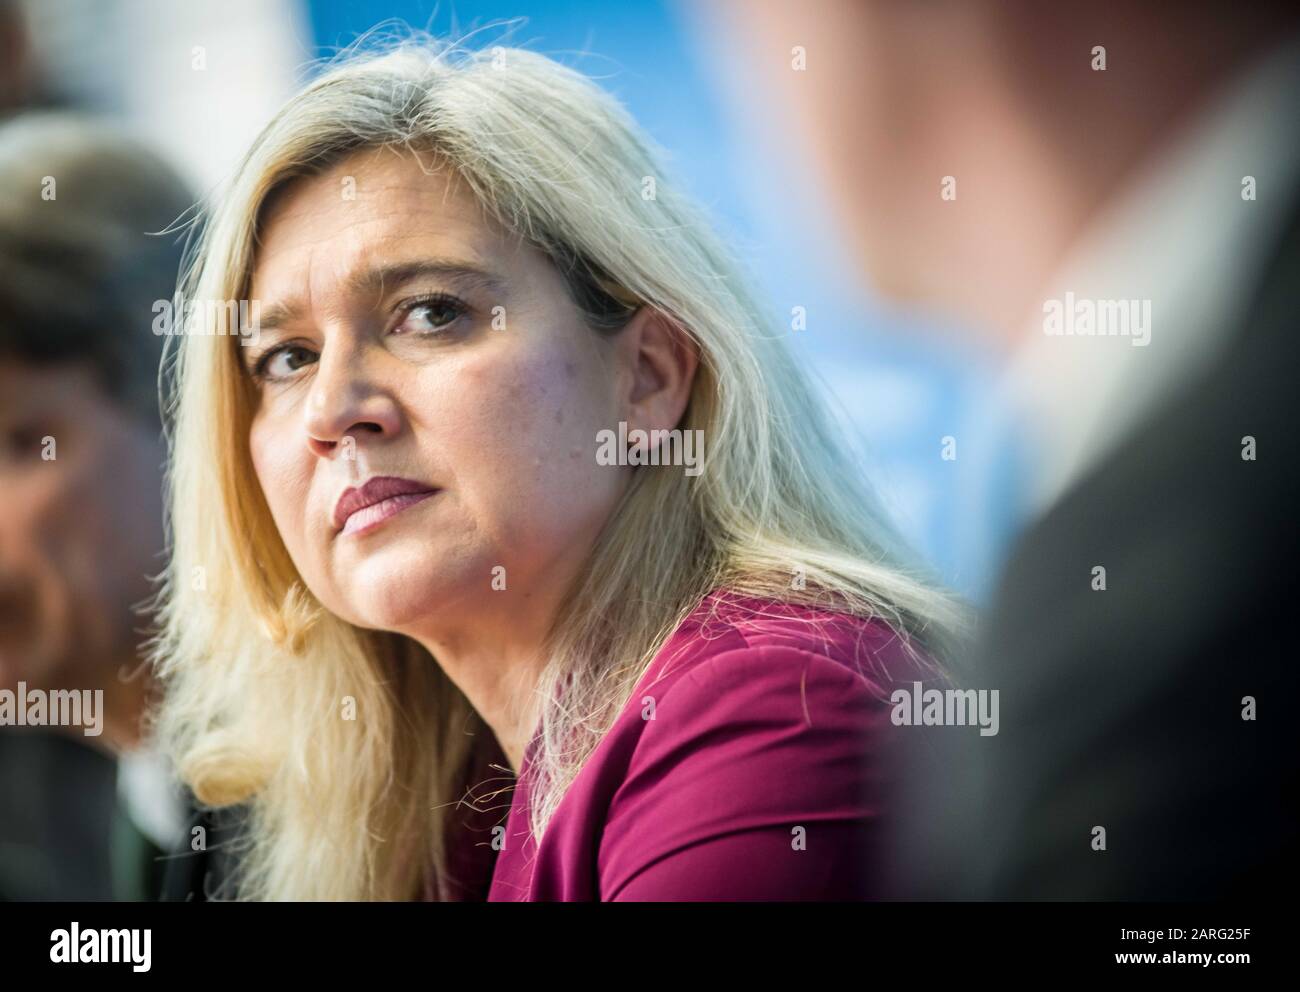 Munich, Bavaria, Germany. 28th Jan, 2020. MELANIE HUML, physician and Minister of the Bavarian Landtag. In connection with the first confirmed case of Corona Virus in Germany, the Bavarian Health Ministry (Bayerisches Staatsministerium fuer Gesundheit und Pflege) held a press conference to discuss the findings. The virus was found in the wealthy Lake Starnberg area, just outside of western Munich, which is also connected to the citiy via its S-Bahn network. The affected is a 33 year old from Landsberg, who works at a firm in Starnberg recently had contact with a Chinese employee in Germany Stock Photo